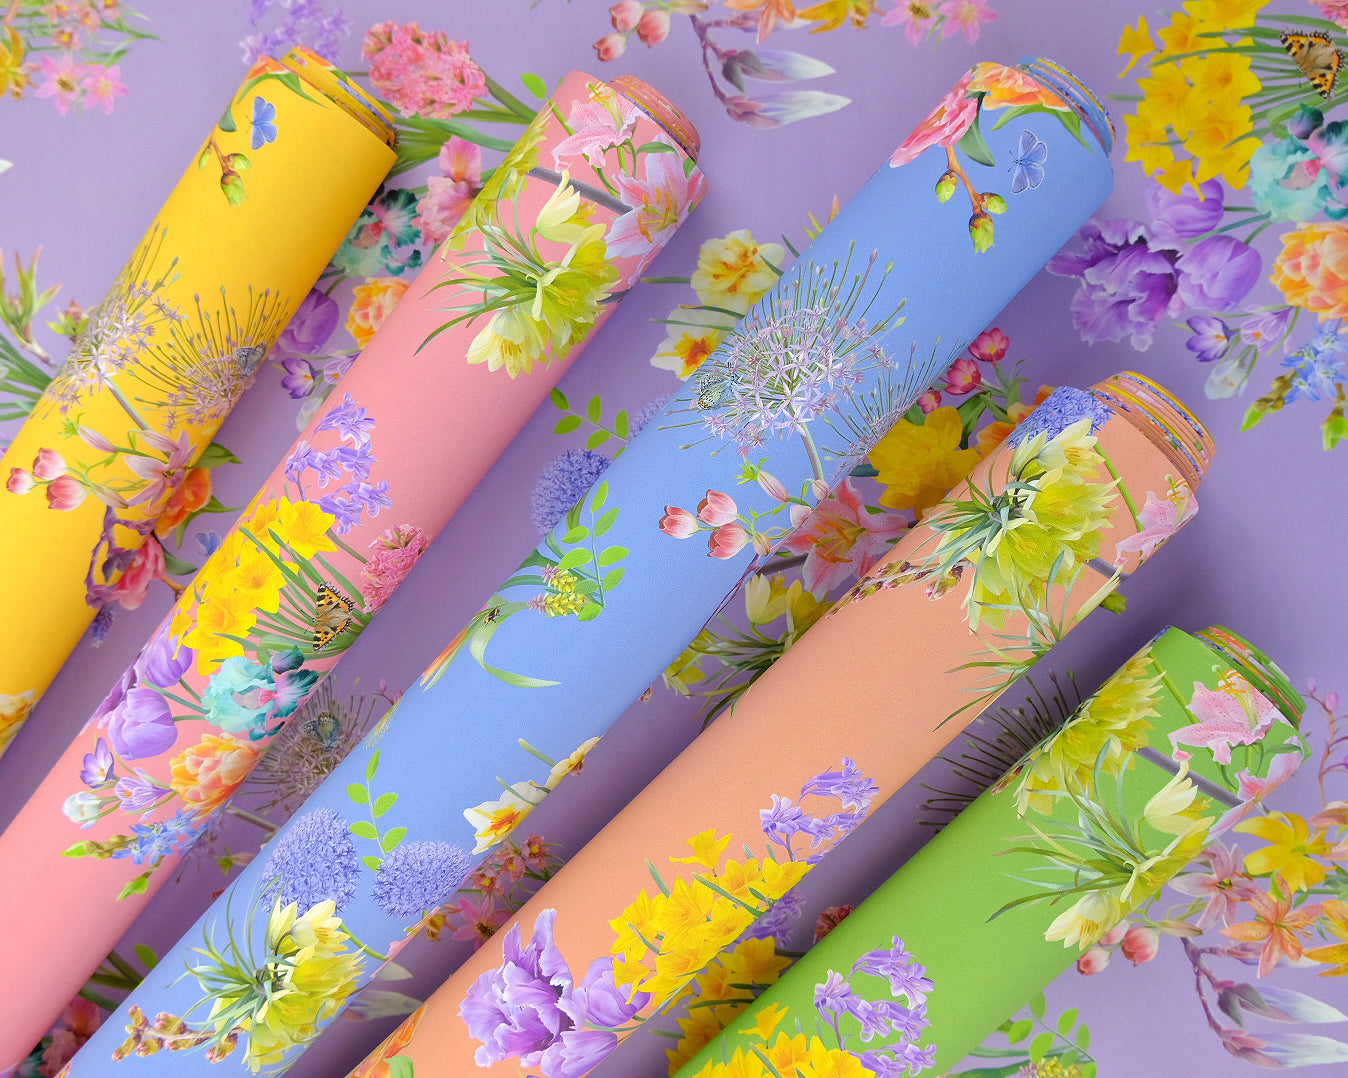 optimism renewed wallpaper with swathes of hand drawn spring florals to brighten and interiors.